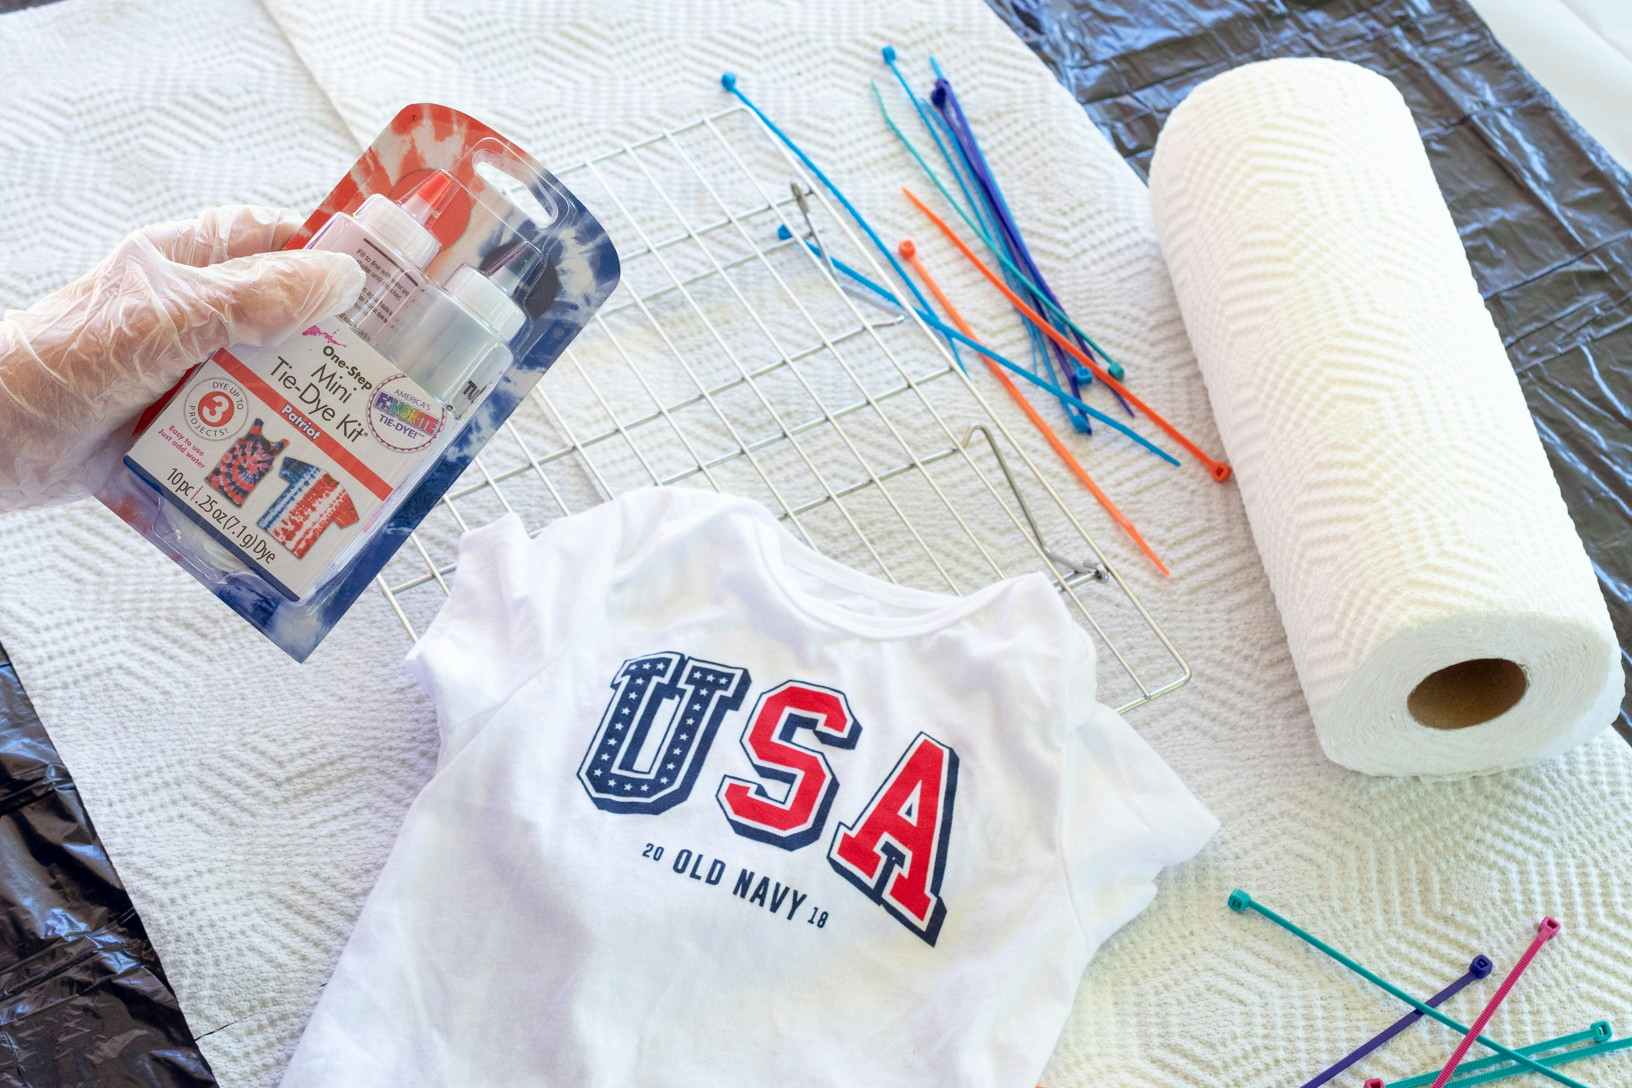 A person's gloved hand holding a tie-dye kit above a plain white Old Navy USA baby onsie, some zip ties, and a roll of paper towel sitting on a table.